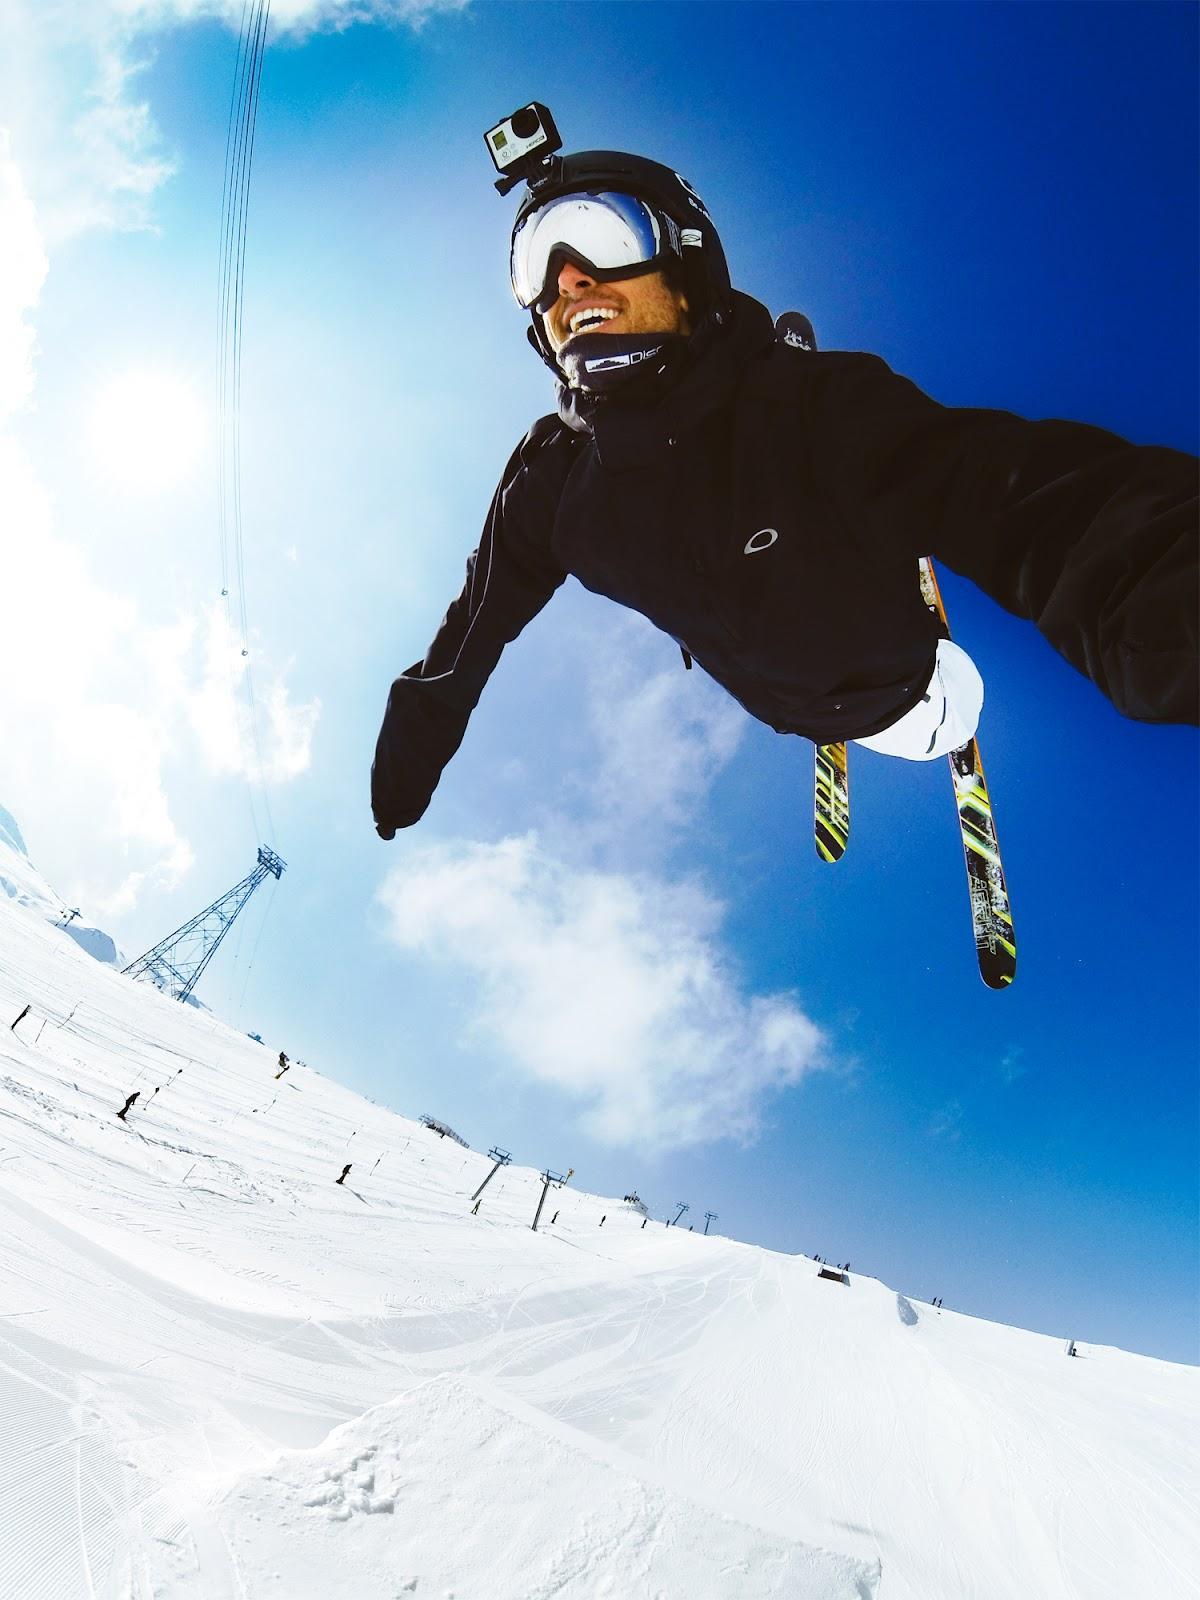 GoPro uses user generated content to market it's products